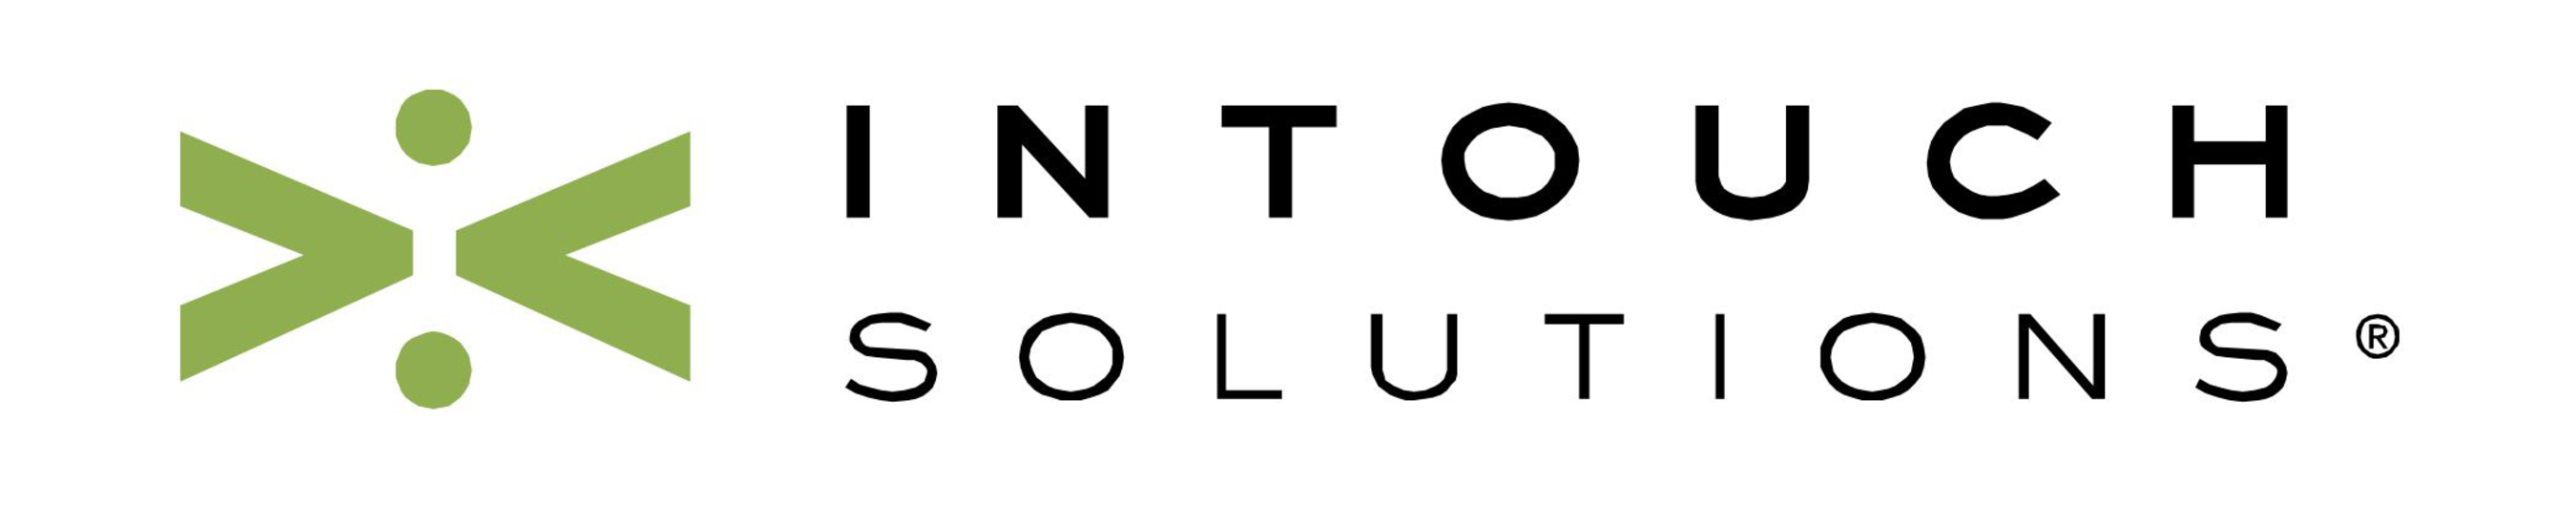 Intouch Solutions logo. (PRNewsFoto/Intouch Solutions)